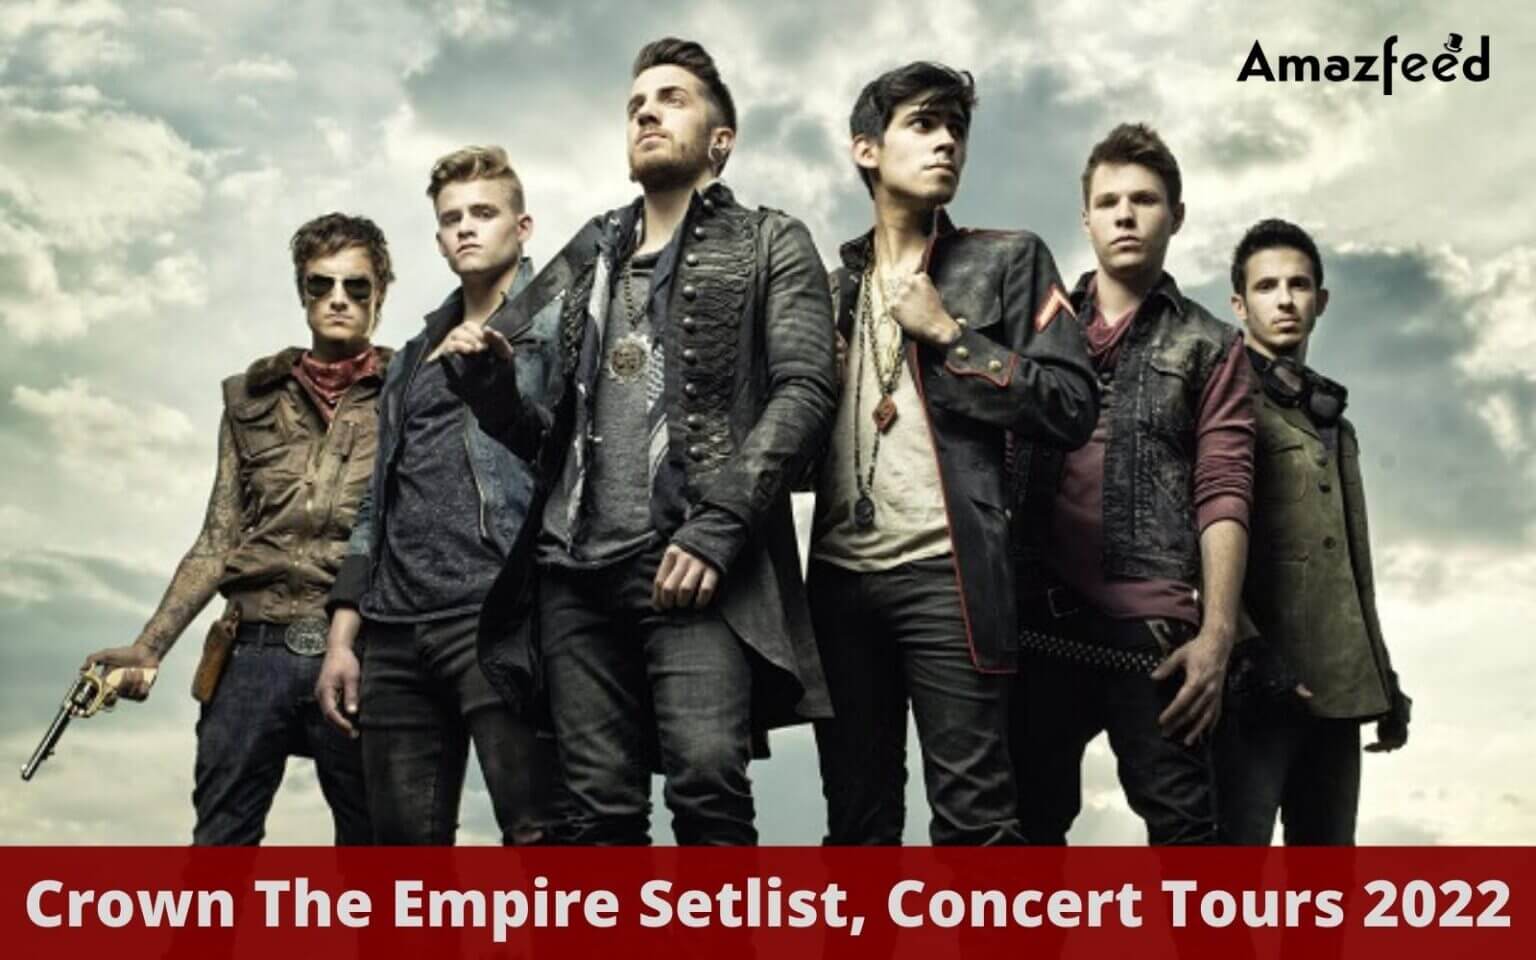 Crown The Empire Setlist 2022, Concert Tour Dates in 2022 USA Set